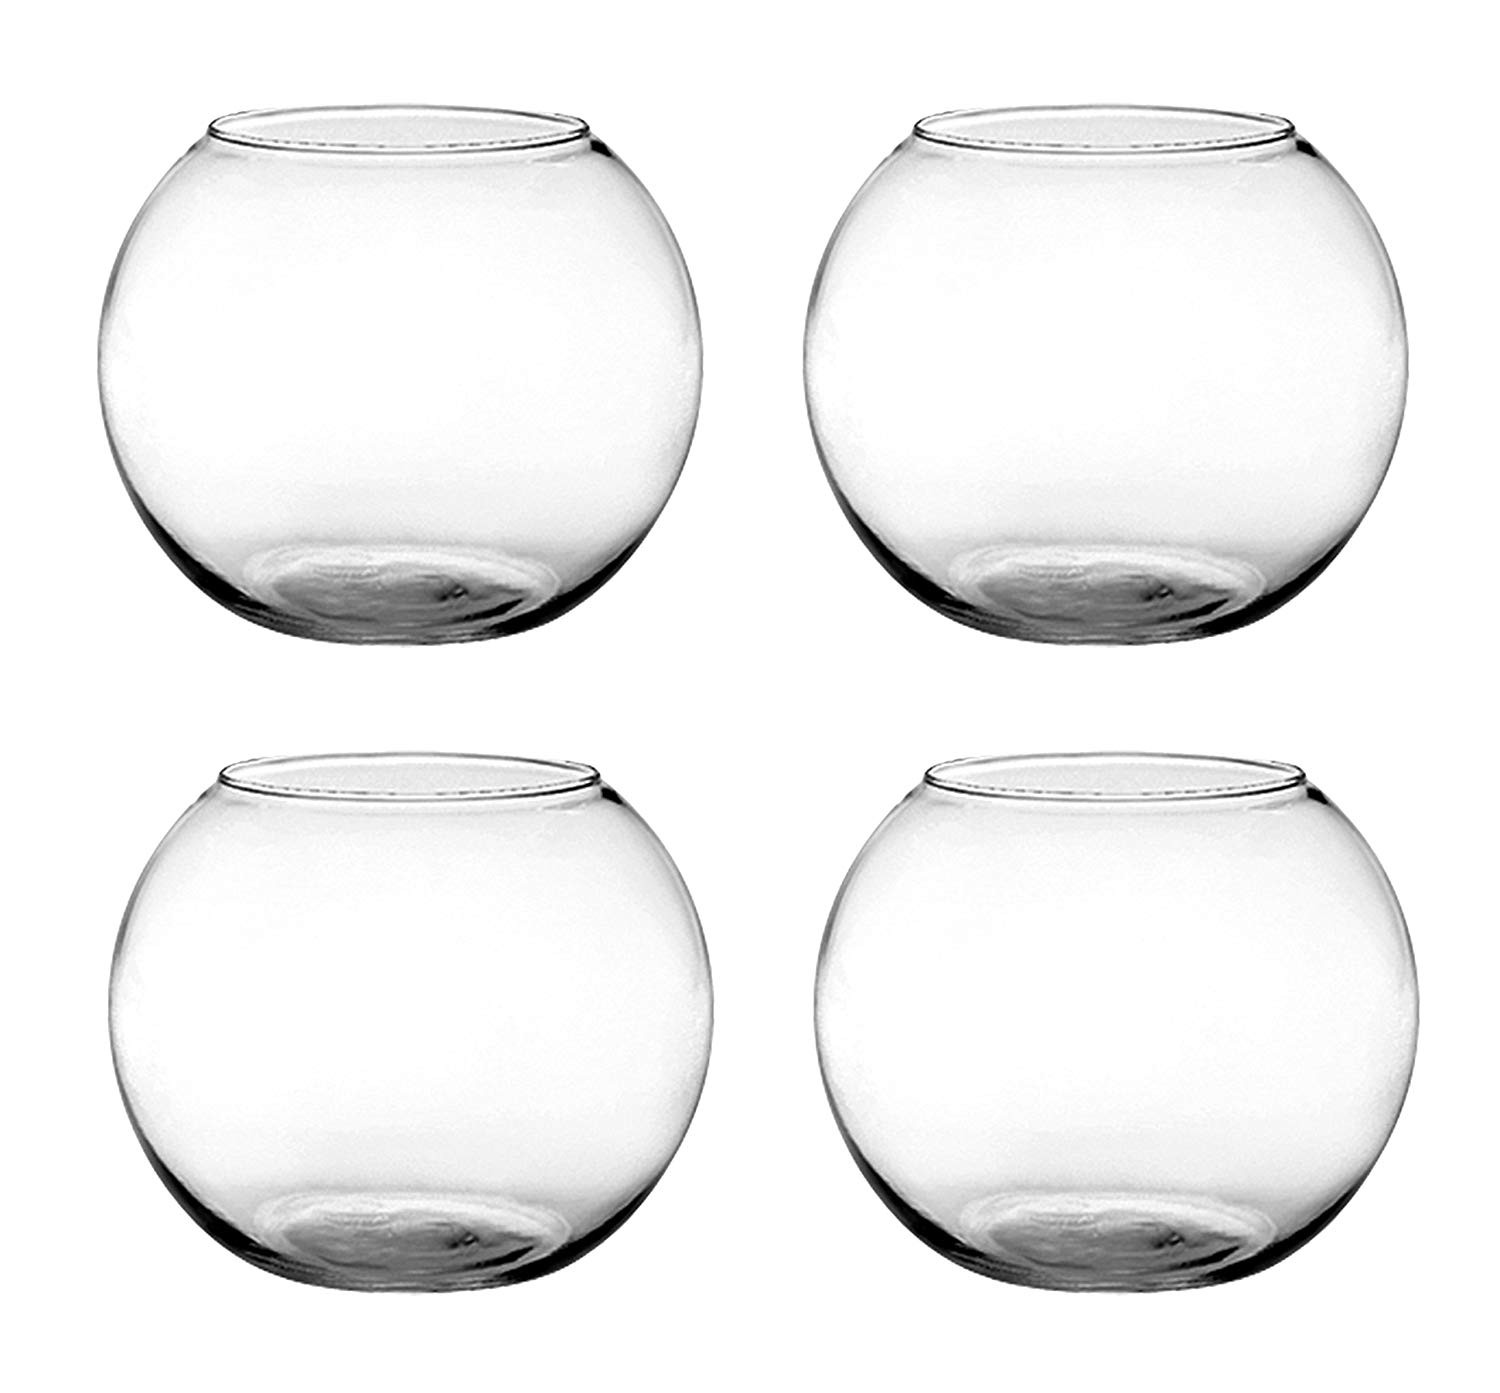 22 Stylish Low Cost Glass Vases 2023 free download low cost glass vases of amazon com set of 4 syndicate sales 6 inches clear rose bowl with amazon com set of 4 syndicate sales 6 inches clear rose bowl bundled by maven gifts garden outdoor